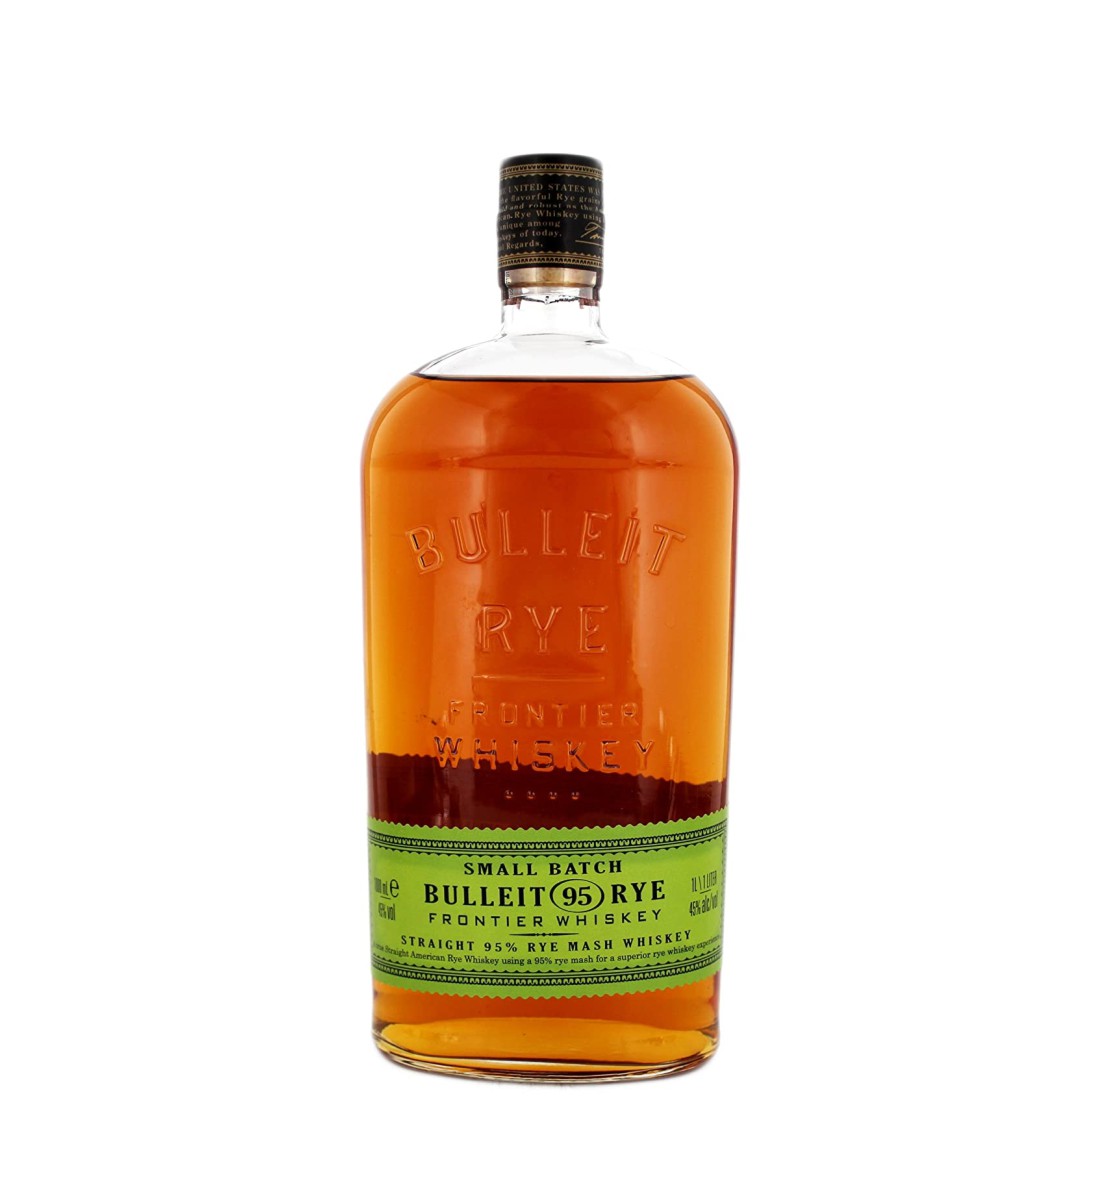 Whiskey Bulleit 95 Rye Frontier 1L bauturialcoolice.ro